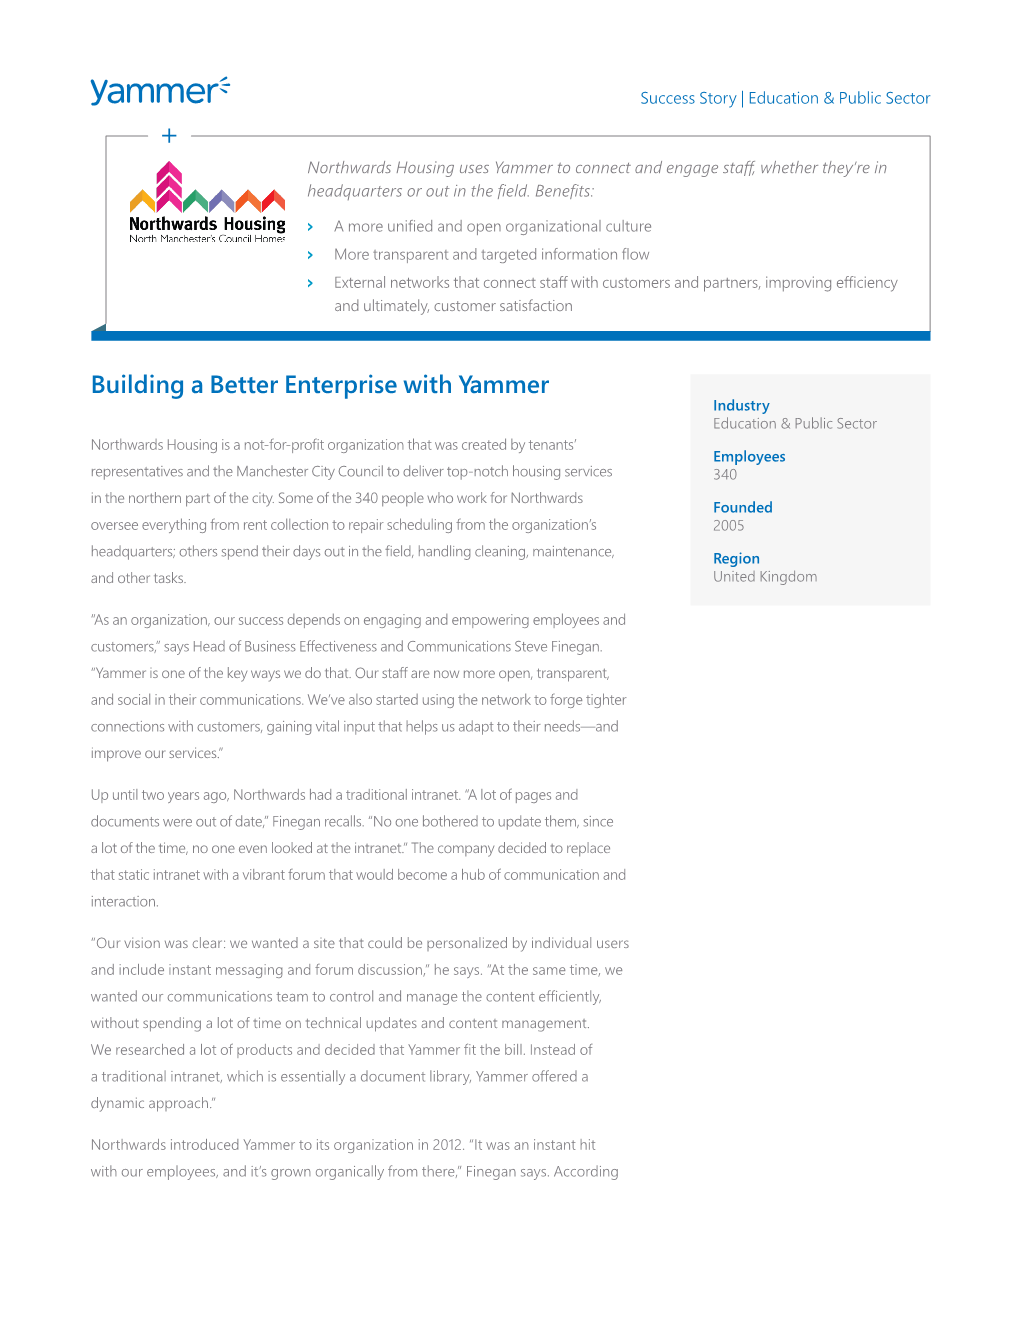 Building a Better Enterprise with Yammer